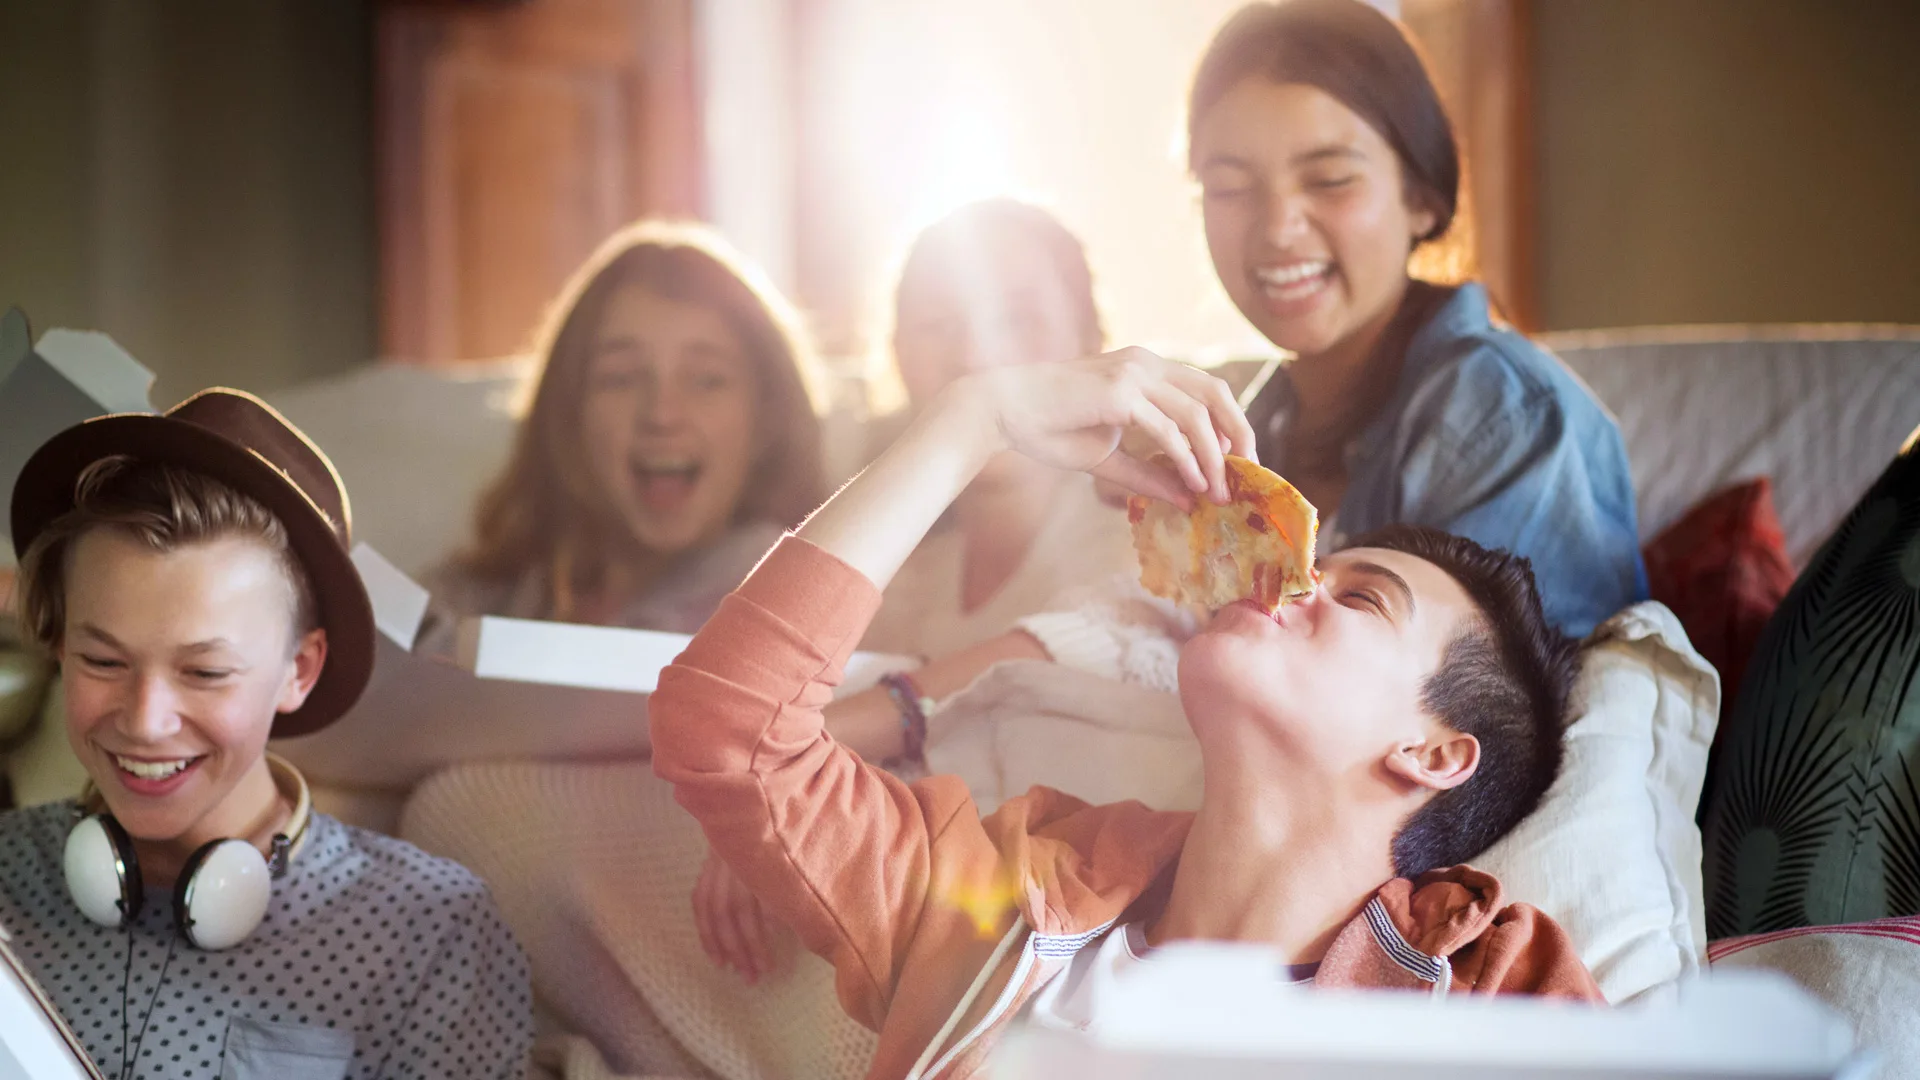 A photograph of some teenagers laughing and eating pizza as the sun shines through the window